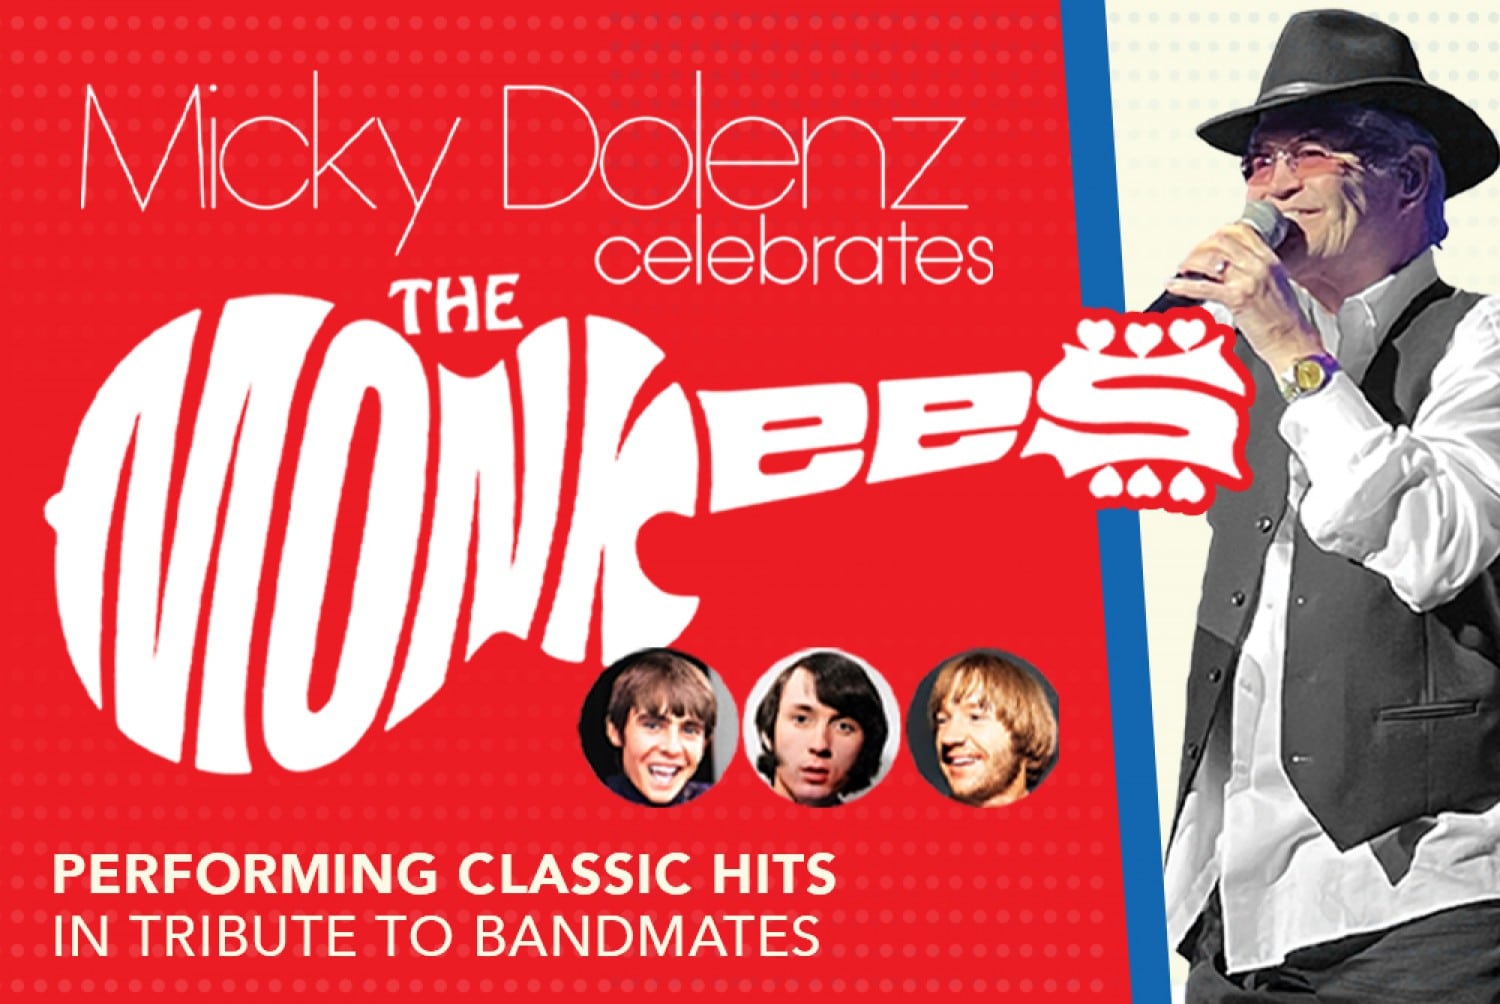 Micky Dolenz Celebrates The MONKEES @ EKU Center for the Arts | Richmond | Kentucky | United States